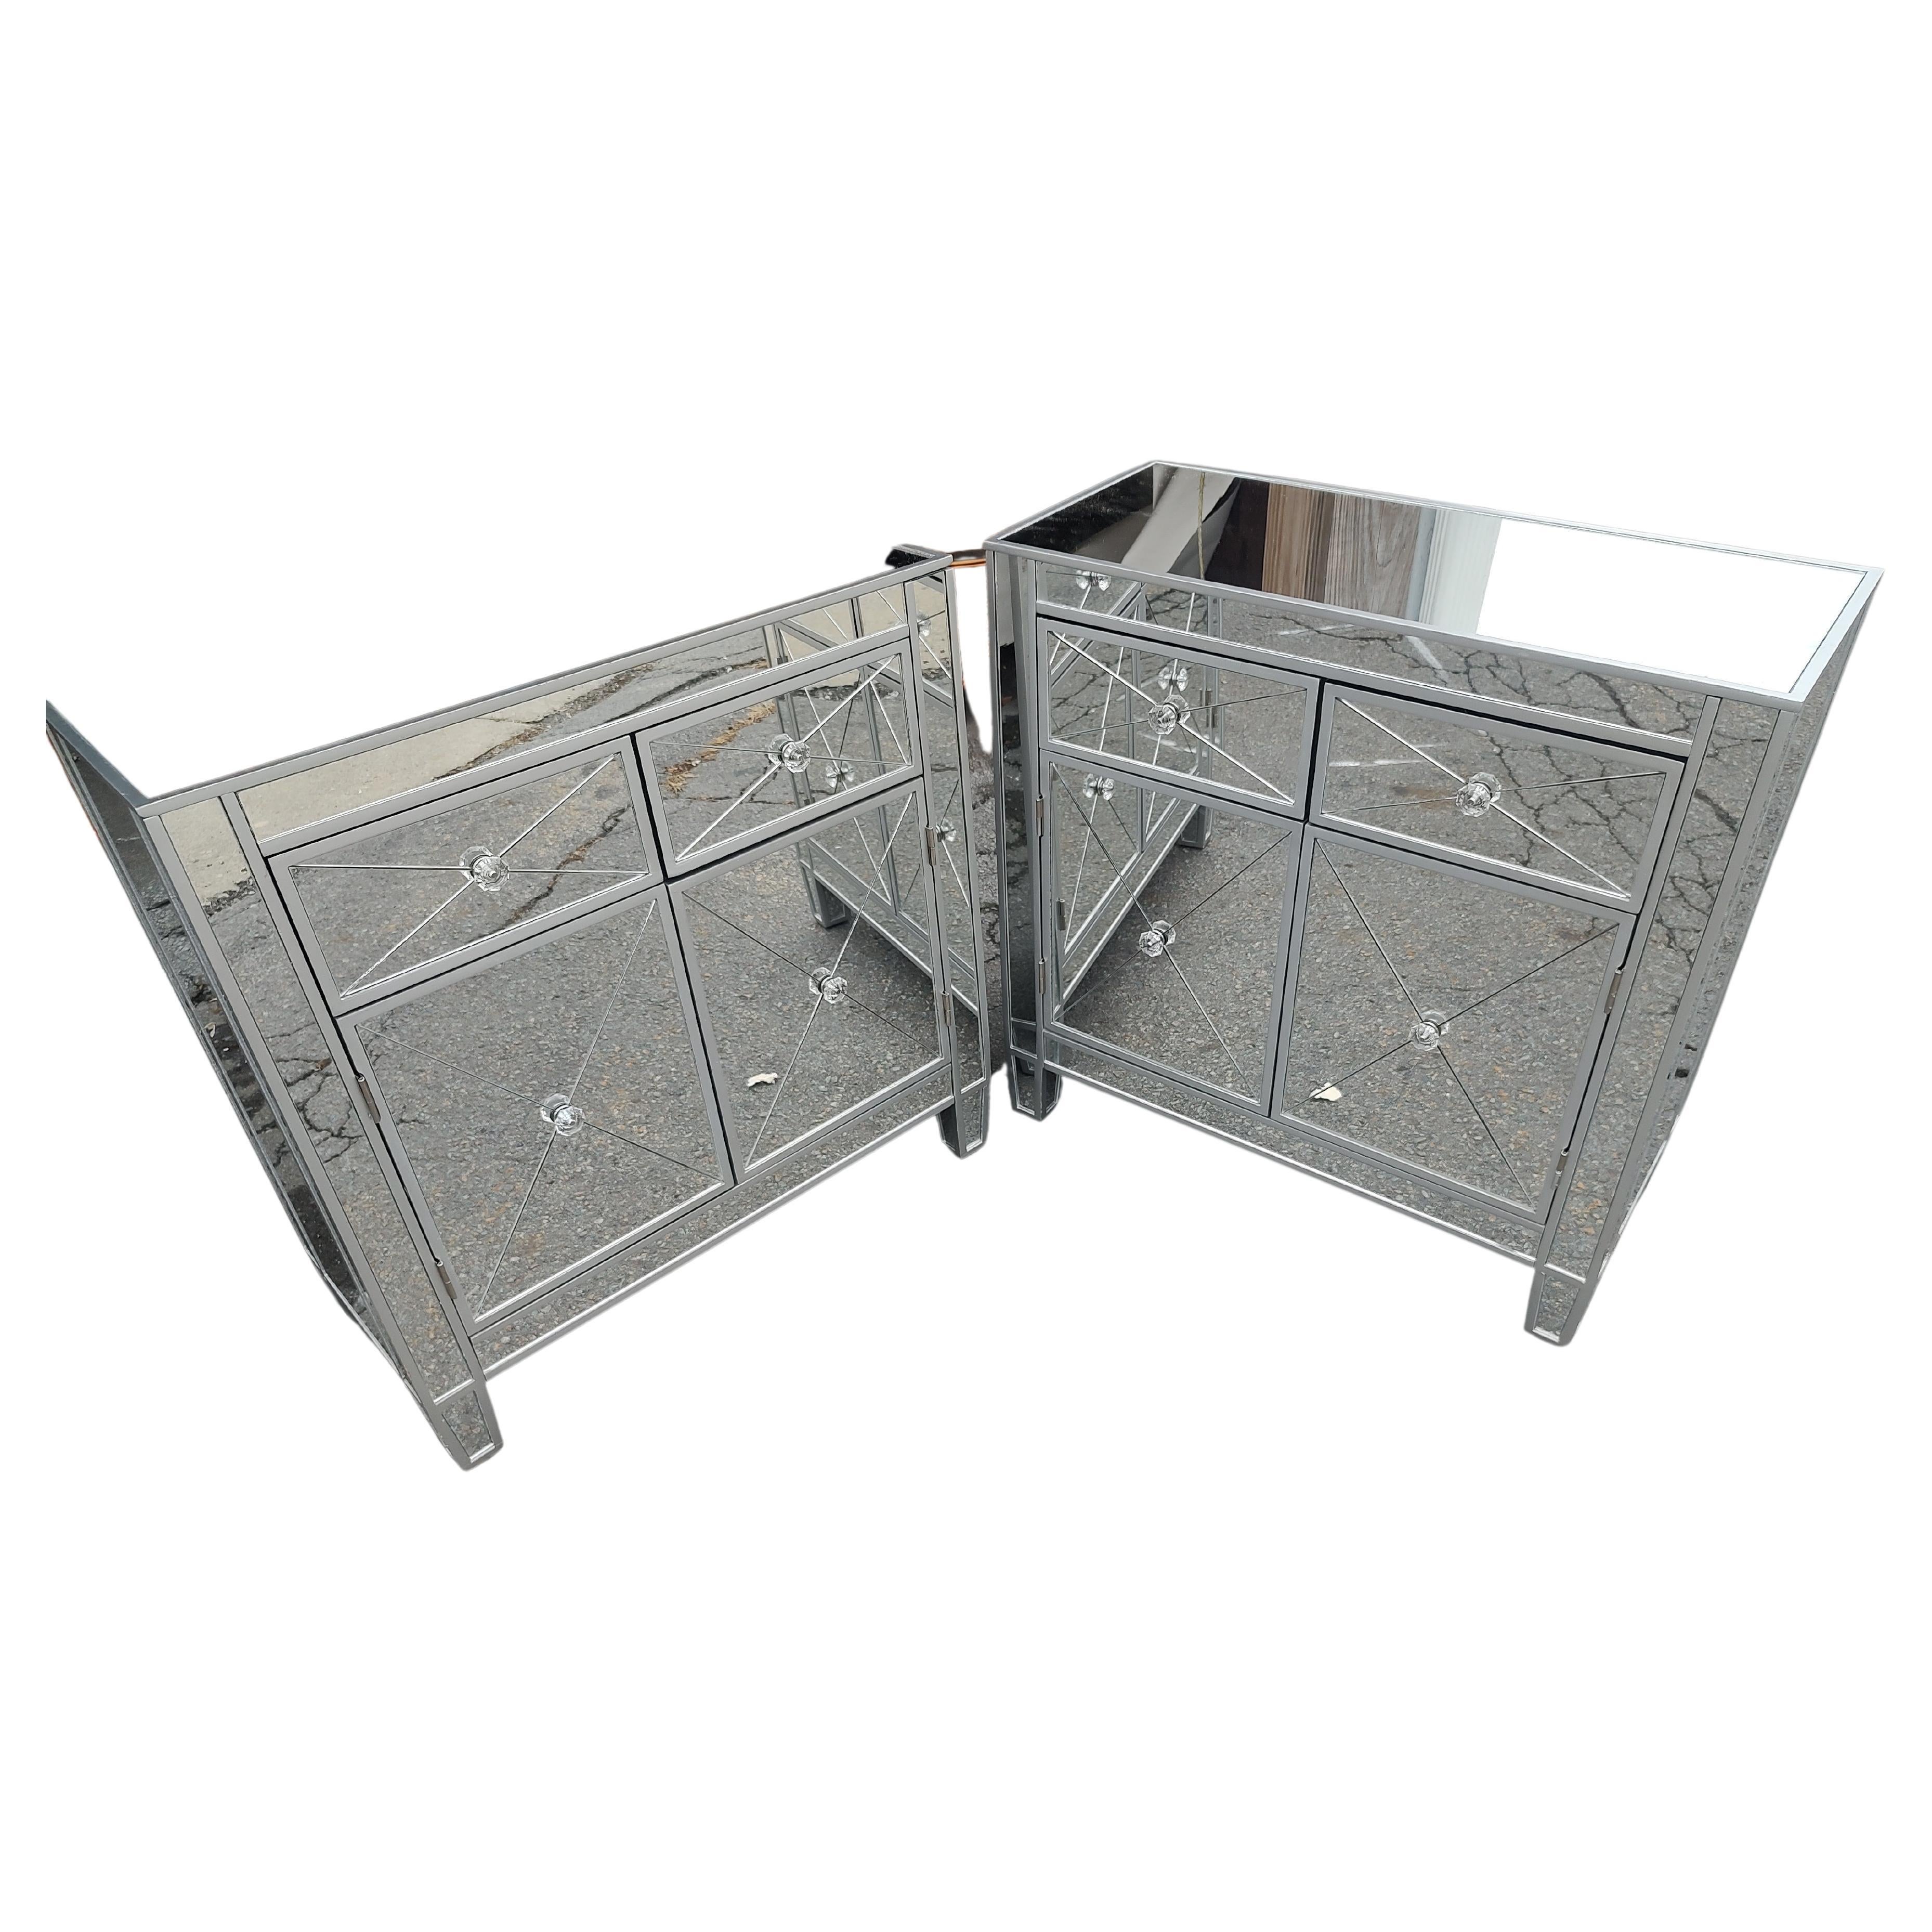 Fabulous pair of fully mirrored night tables with silver leaf trim. Two drawers over two doors supply ample storage space. Glass knobs and etched drawer and door fronts. In excellent used condition with minimal wear, no damage to the mirrors. Priced